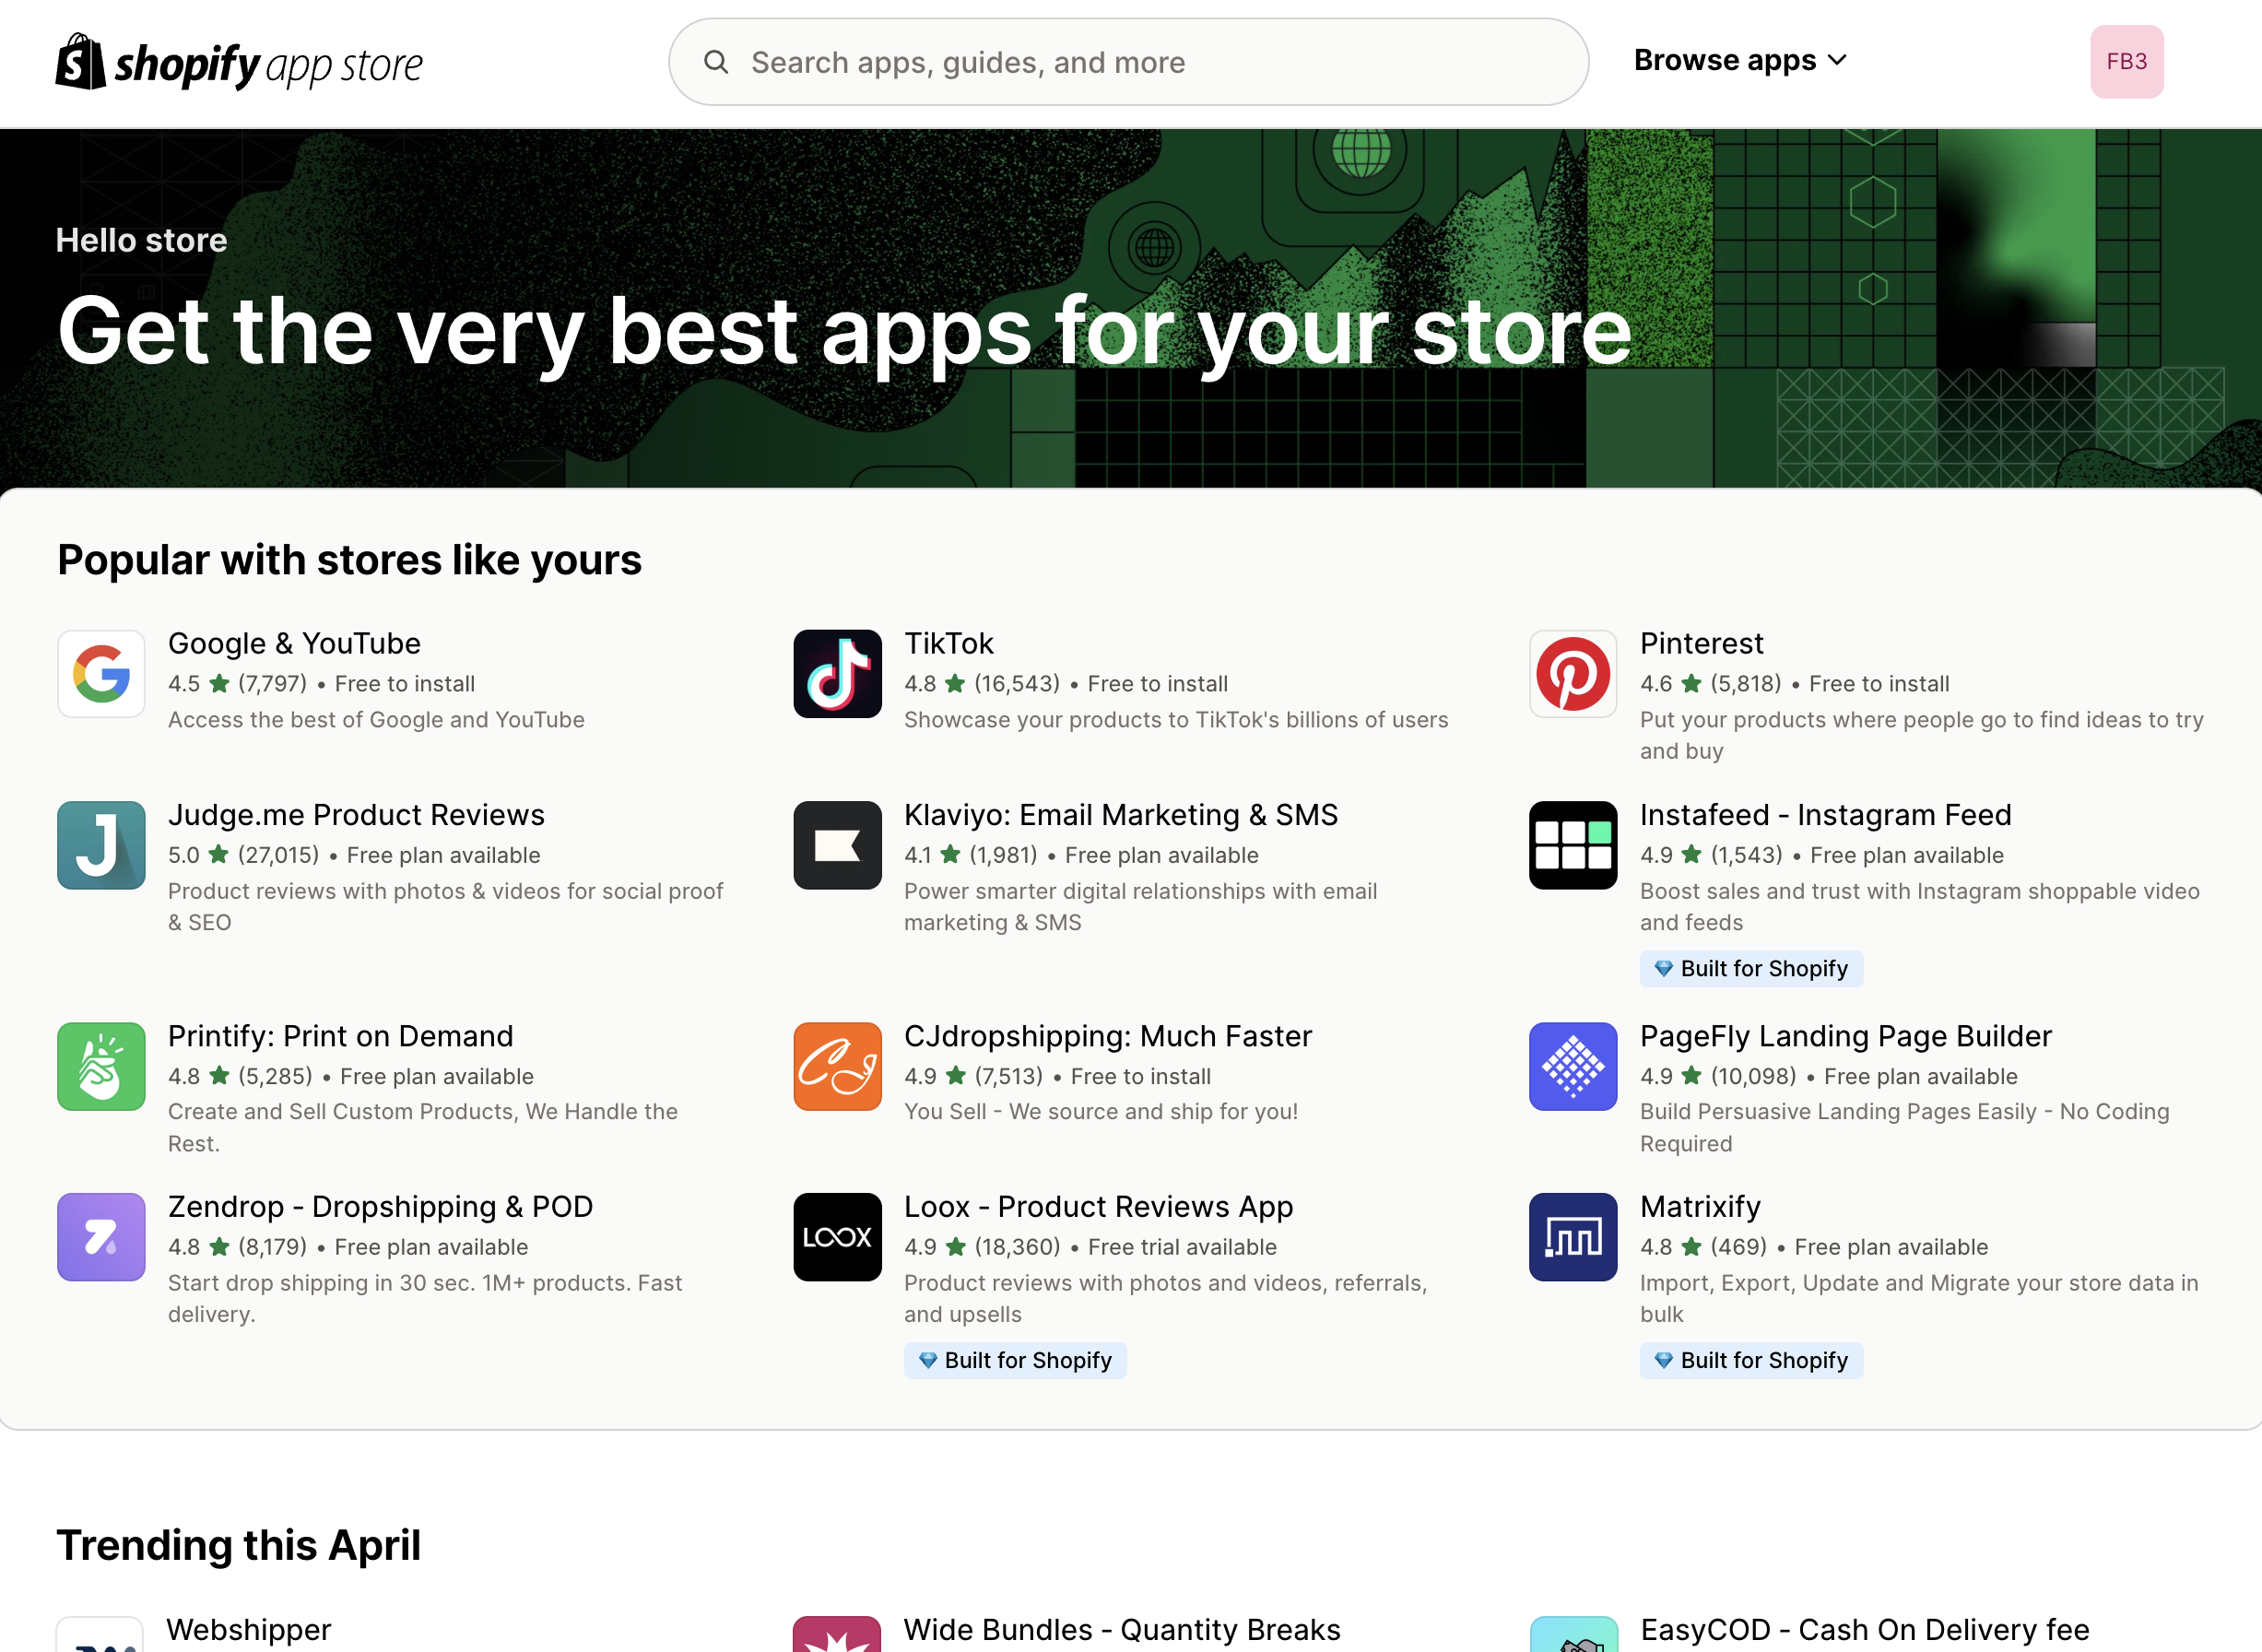 The Shopify App store has over 8 thousand apps – https://apps.shopify.com